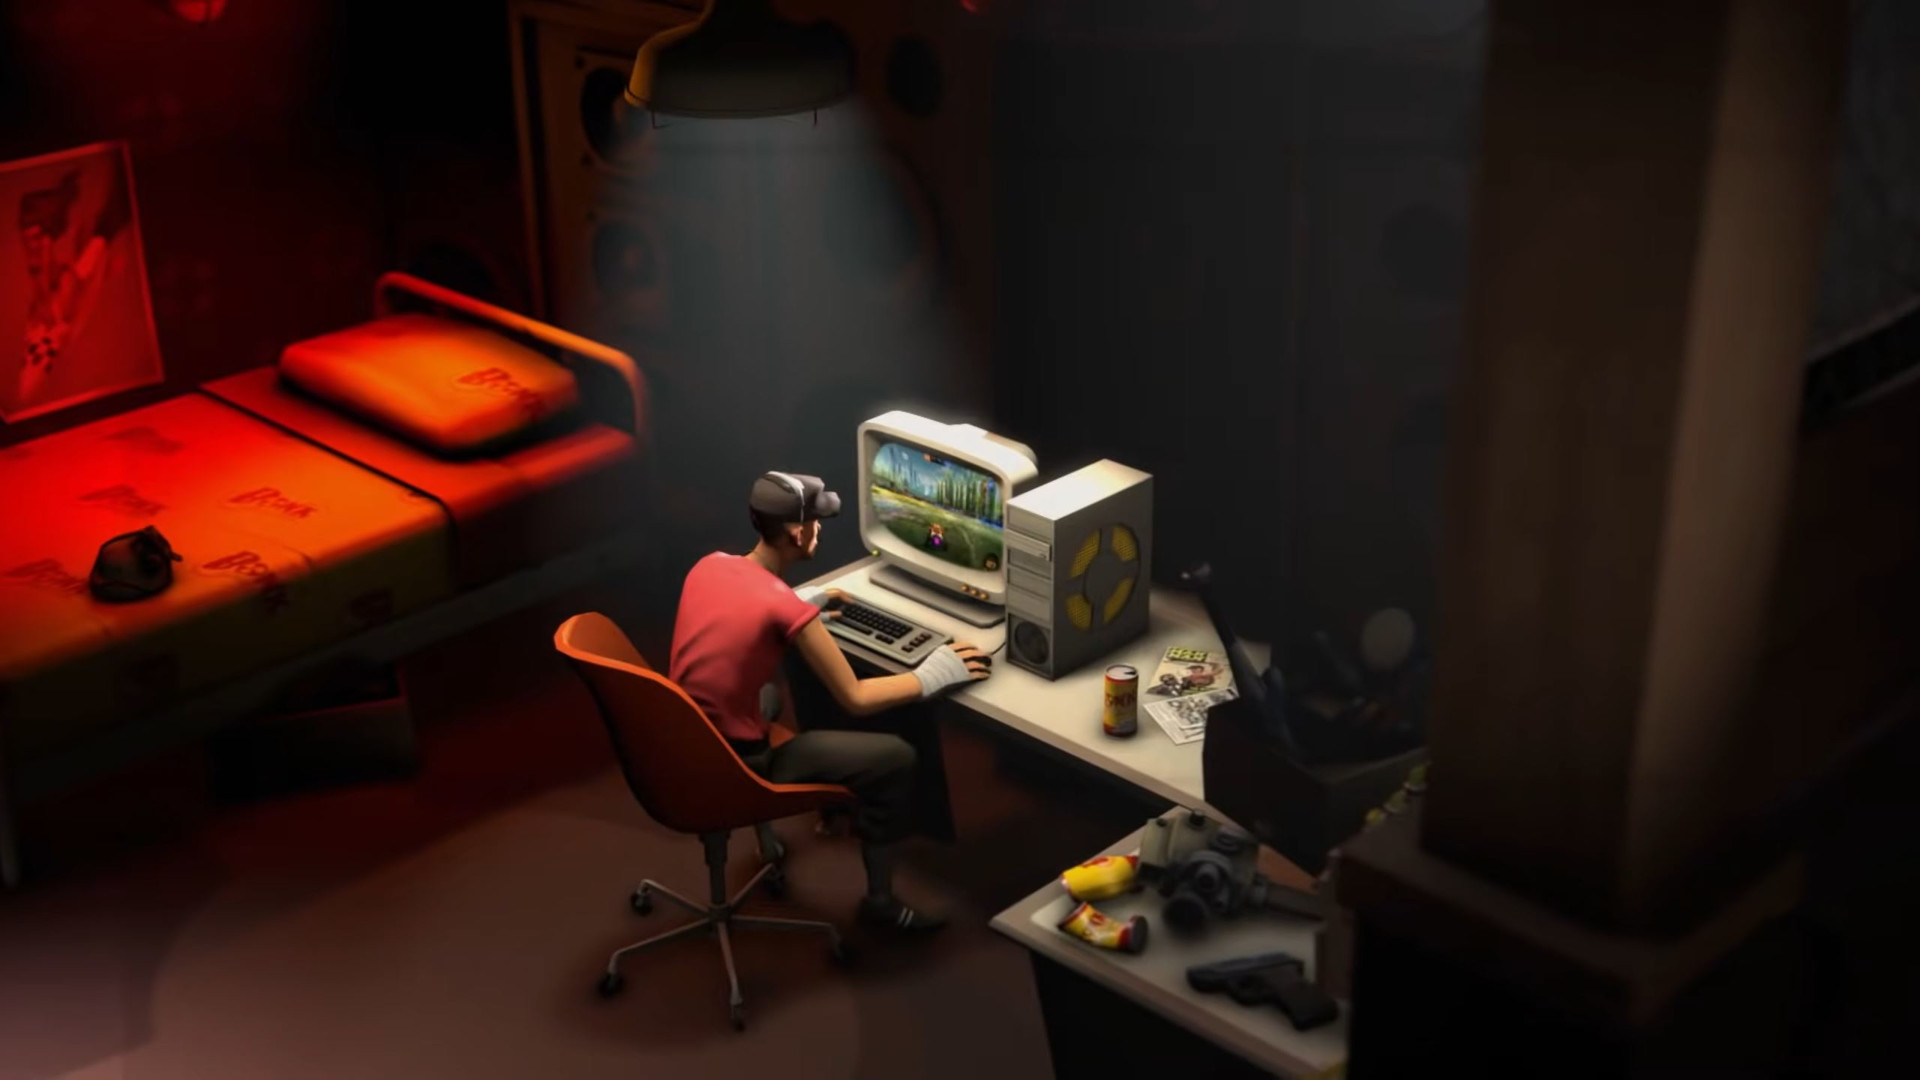 Team Fortress 2's Scout playing a game on an old-school PC to illustrate Steam Family Sharing